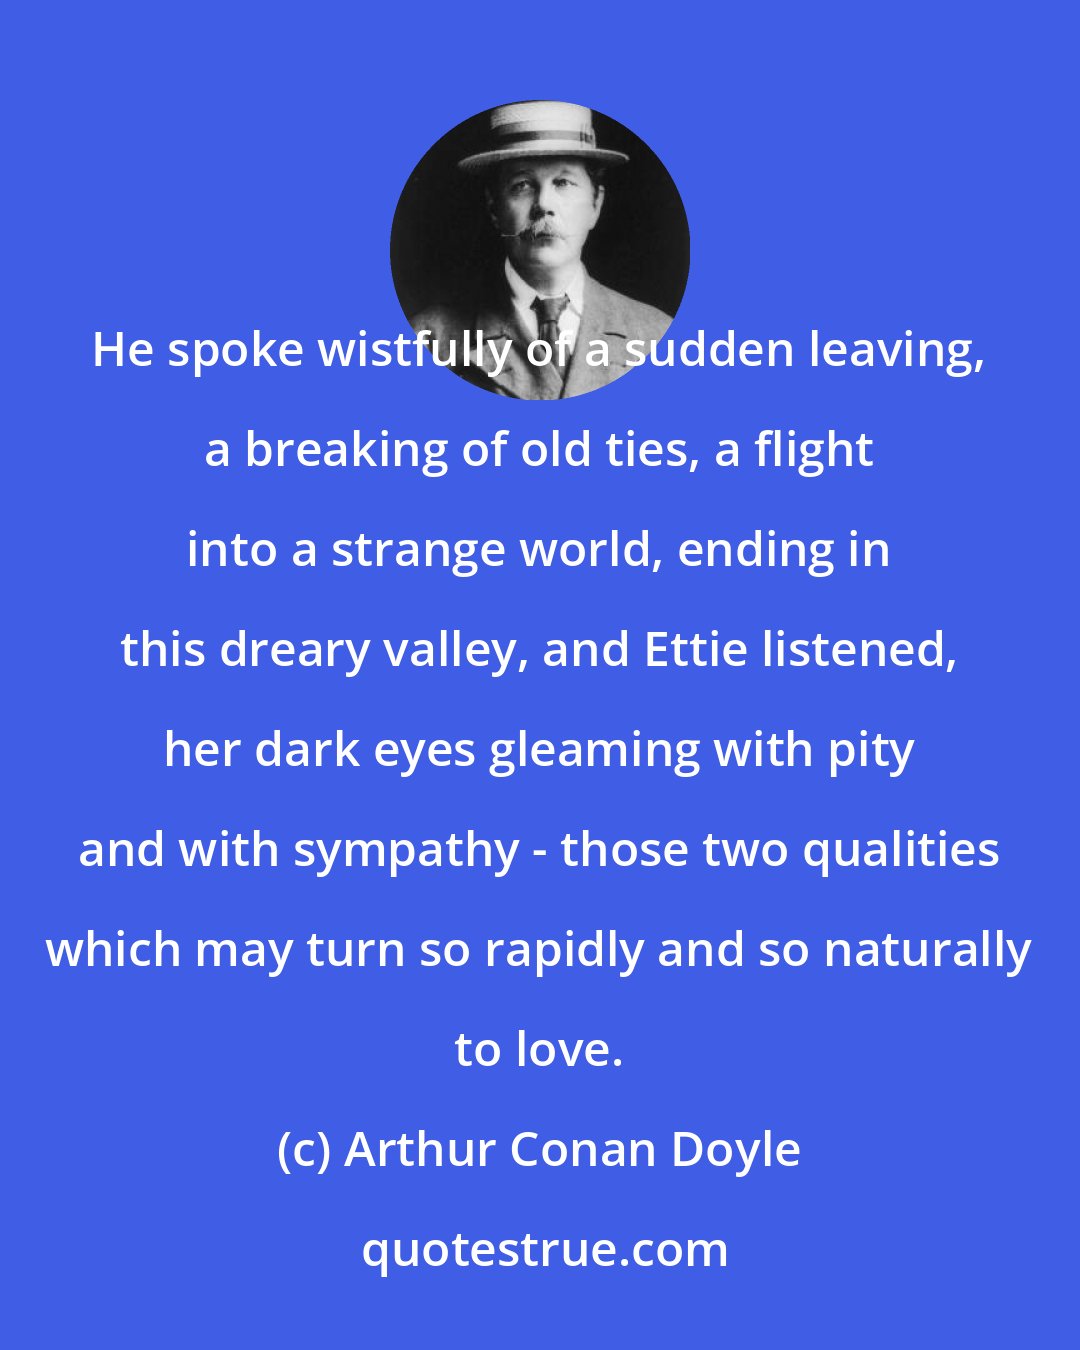 Arthur Conan Doyle: He spoke wistfully of a sudden leaving, a breaking of old ties, a flight into a strange world, ending in this dreary valley, and Ettie listened, her dark eyes gleaming with pity and with sympathy - those two qualities which may turn so rapidly and so naturally to love.